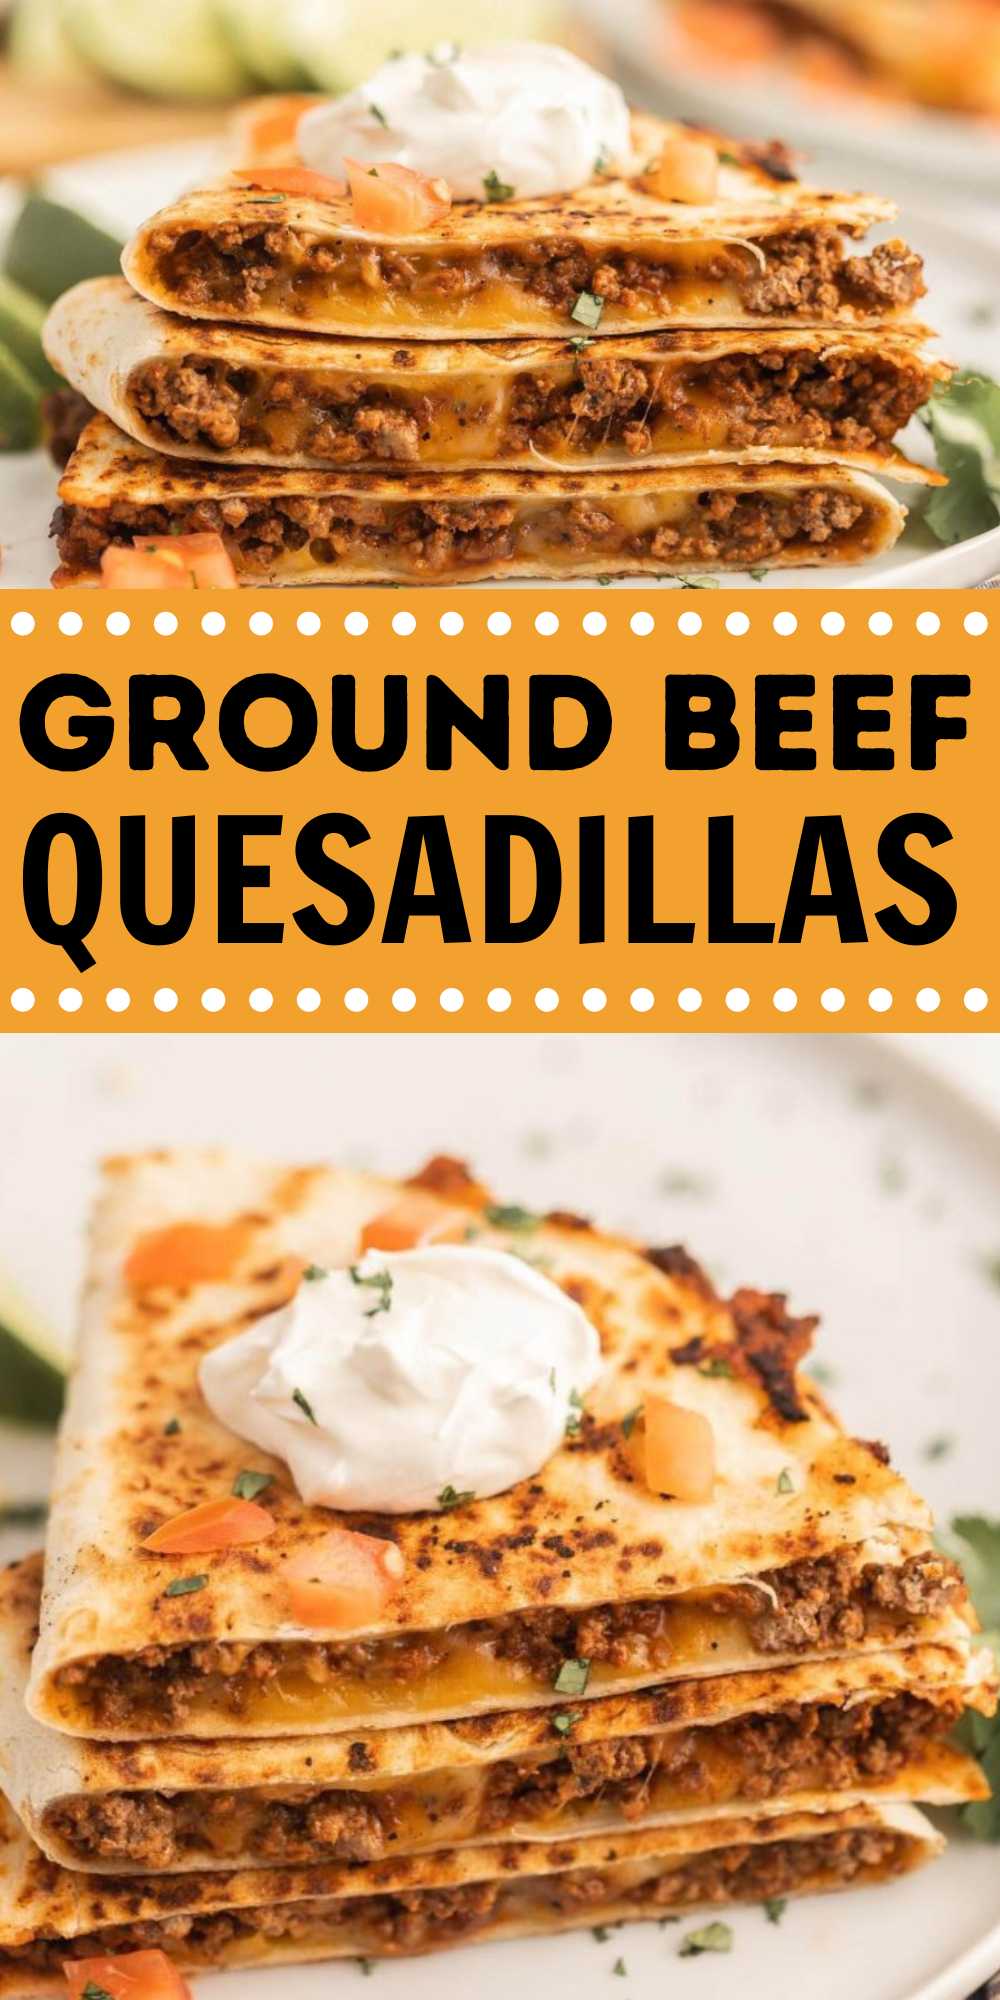 Make this Ground Beef Quesadillas Recipe for a family favorite meal idea. Loaded with seasoned ground beef, cheese and simple seasoning. Seasoned ground beef is cooked in a skillet and then topped on a flour tortilla with cheese. The tortilla is then folded to make a delicious cheesy beef quesadilla. #eatingonadime #groundbeefquesadillas #beefcheesequesadillas